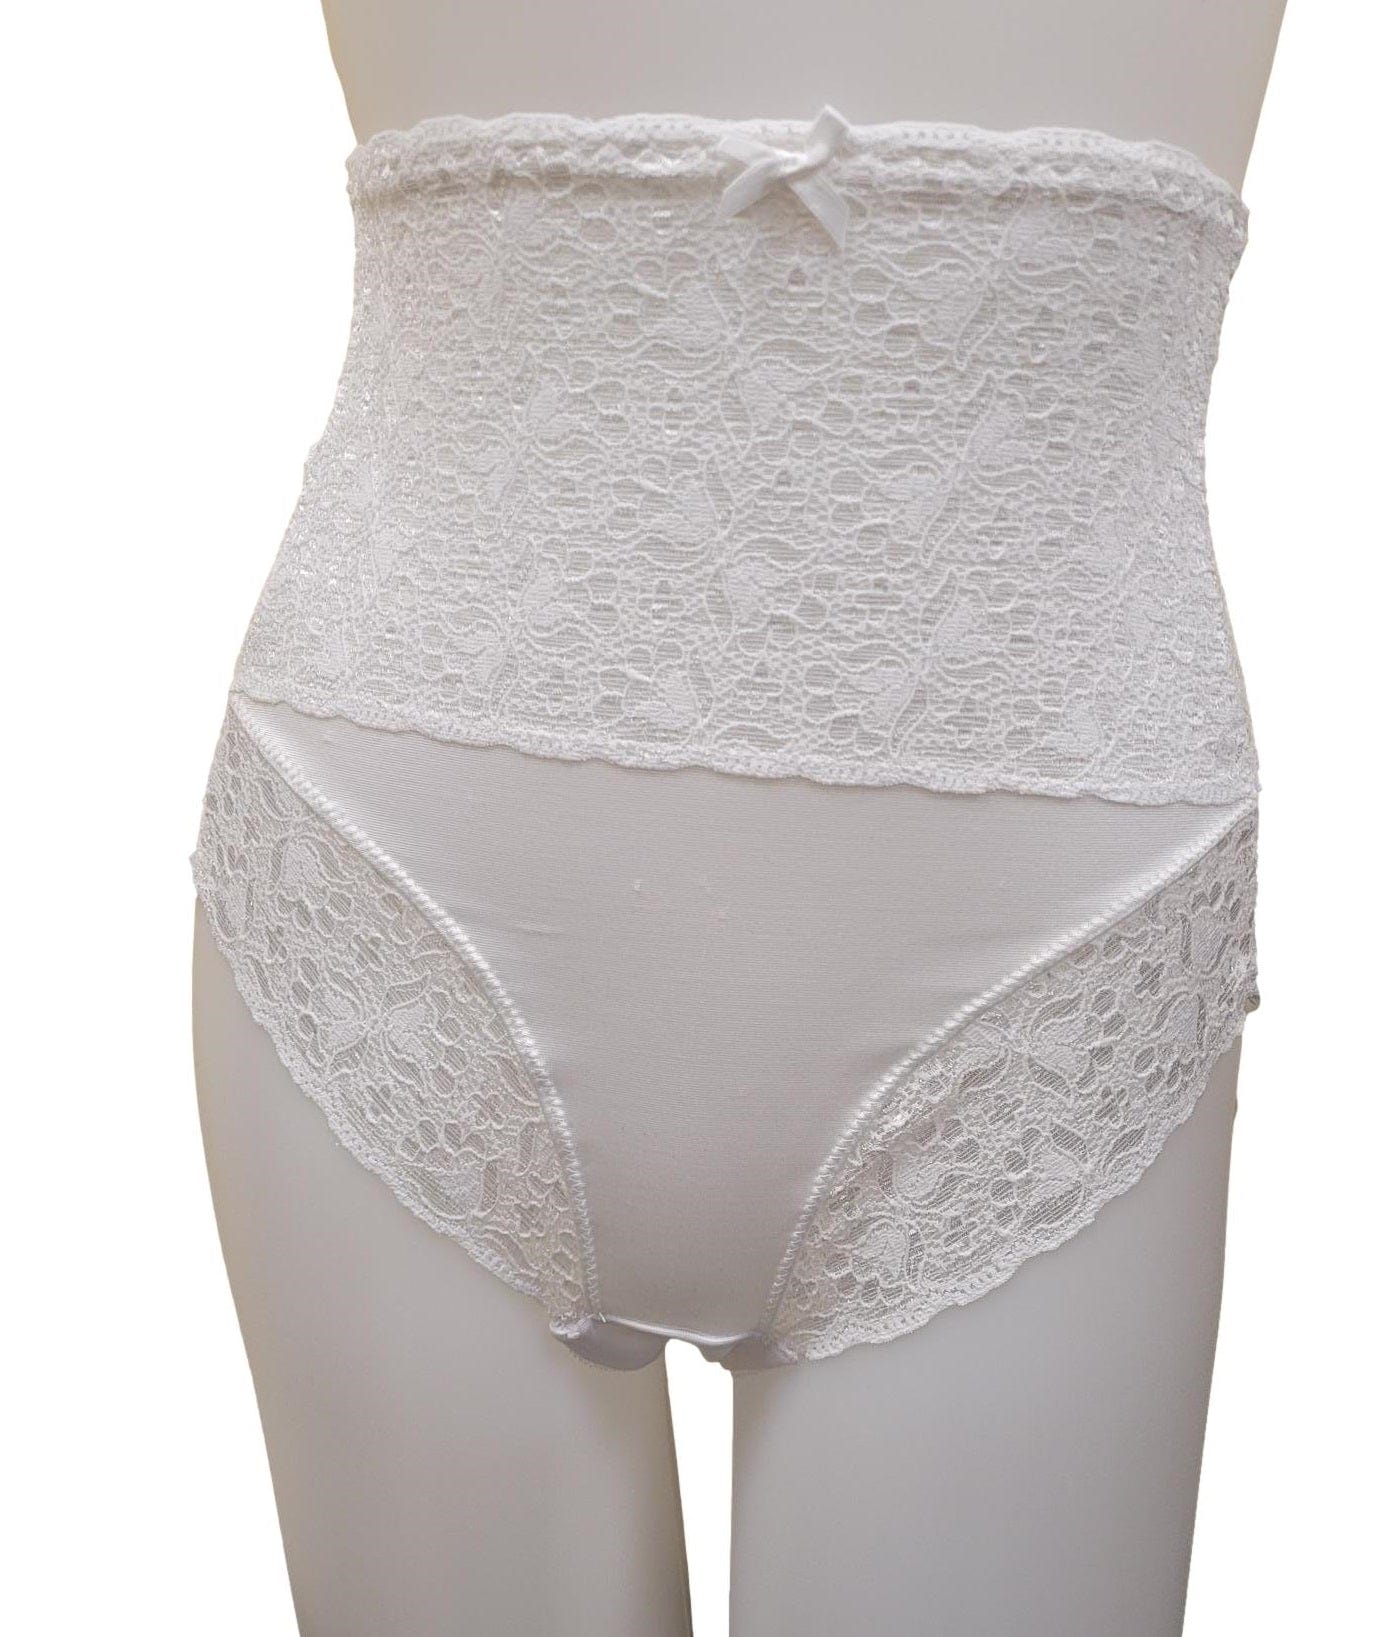 Style 4226 | High Waist Medium Shaping Lace Panty Brief